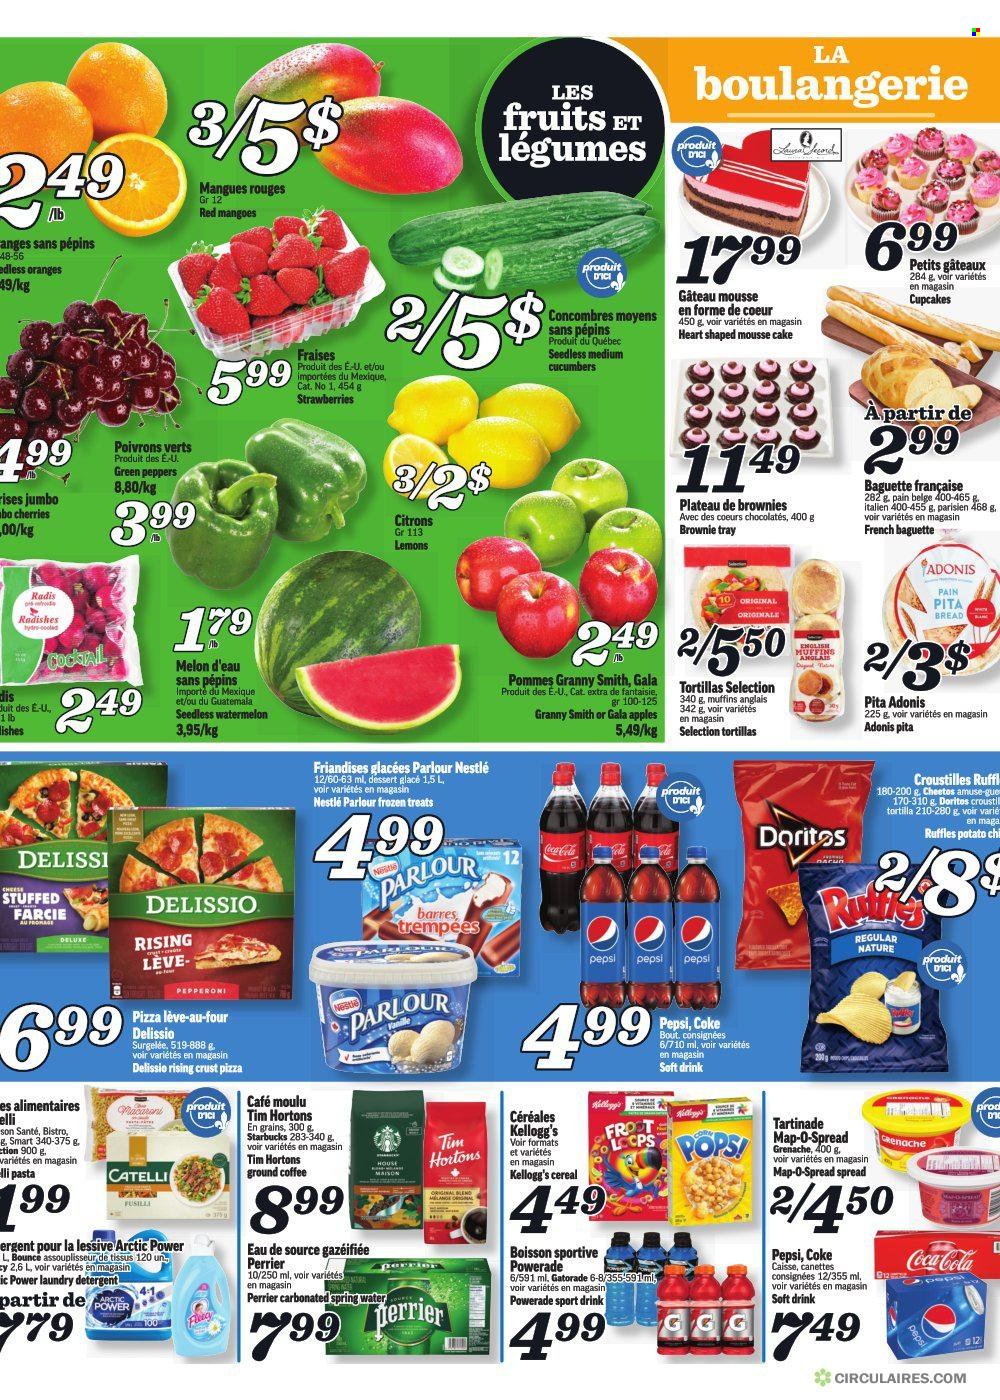 thumbnail - Marché Richelieu Flyer - February 02, 2023 - February 08, 2023 - Sales products - bread, english muffins, tortillas, pita, cake, cupcake, brownies, cucumber, radishes, peppers, apples, Gala, mango, watermelon, cherries, oranges, melons, lemons, Granny Smith, pizza, pasta, pepperoni, chocolate, Kellogg's, Doritos, Cheetos, Ruffles, cereals, Coca-Cola, Powerade, Pepsi, soft drink, Perrier, Gatorade, spring water, coffee, ground coffee, Starbucks, red wine, wine, laundry detergent, Bounce, baguette, detergent, Nestlé. Page 3.